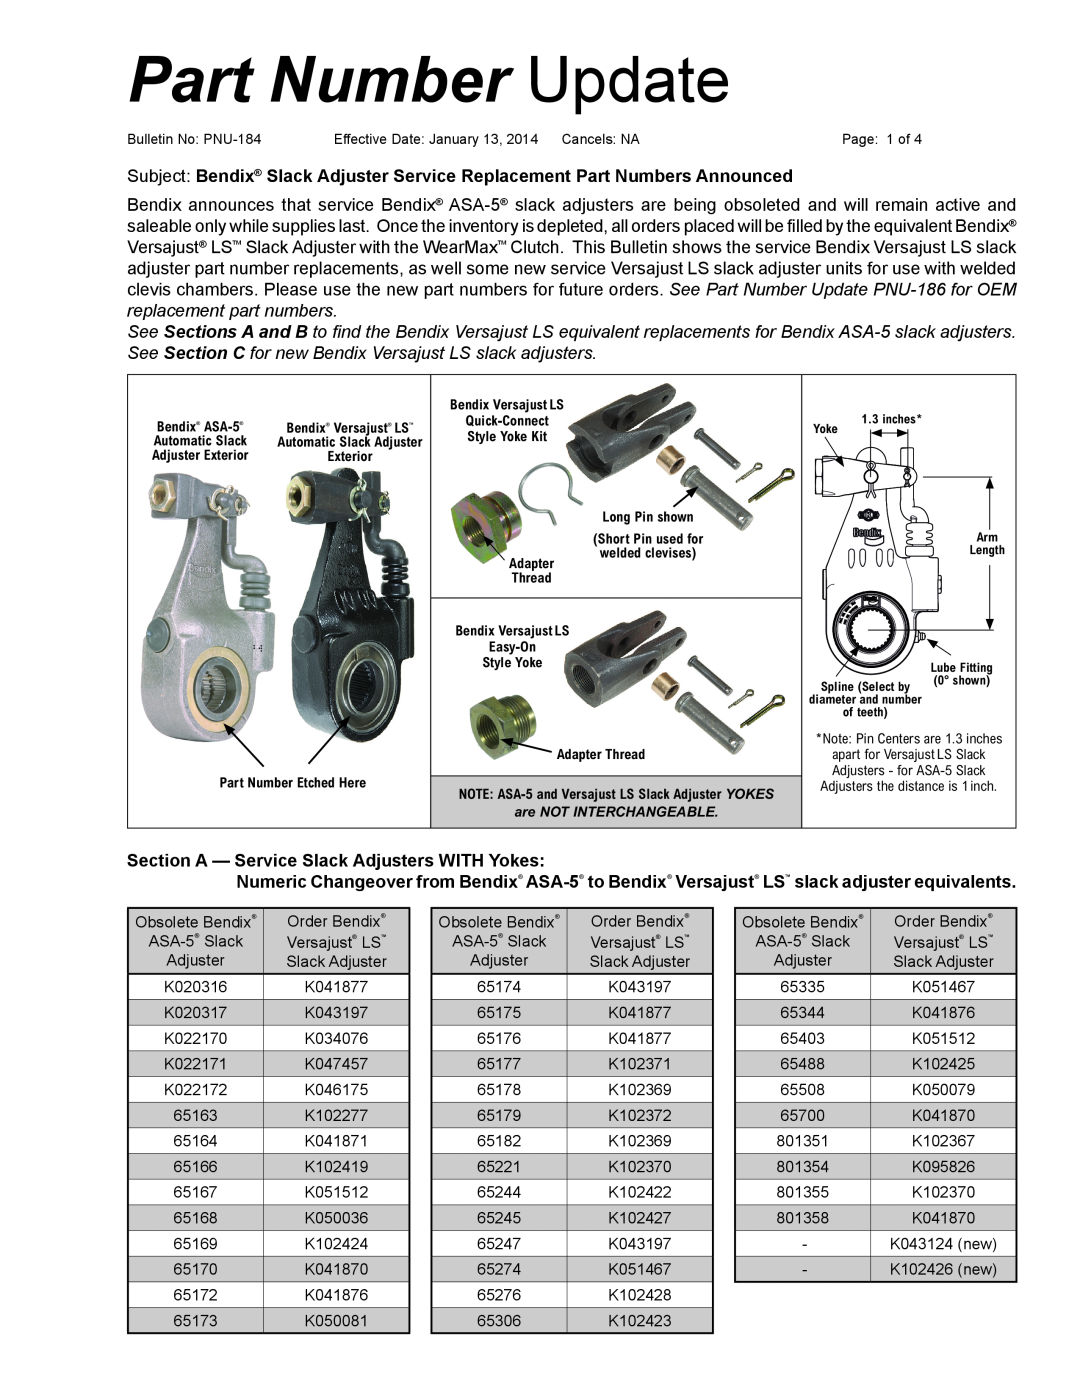 BENDIX PNU-184 manual Section A - Service Slack Adjusters WITH Yokes, Part Number Update 